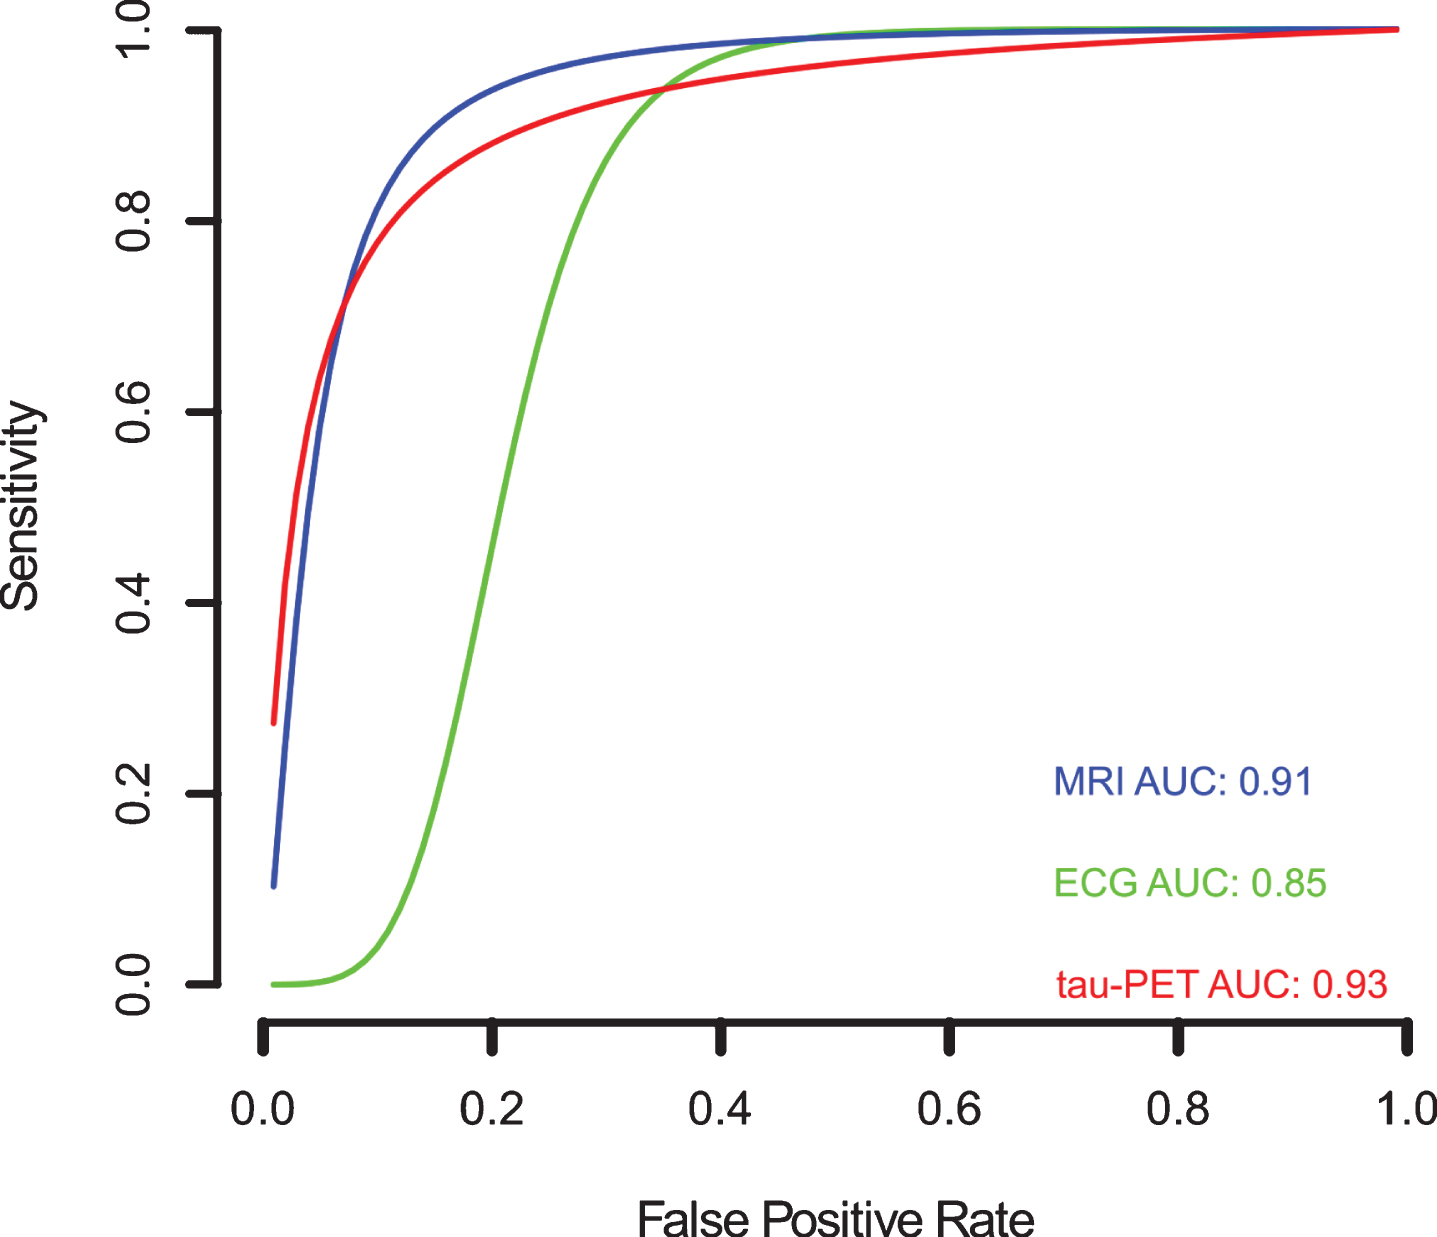 Meta-analysis of diagnostic test accuracy analysis. Summary receiver operating curve (sROC) plot of false positive rate and sensitivity. EEG studies are indicated by green crosses, while tau-PET studies are indicated by open red triangles, and MRI studies are indicated by open blue circles. Curved lines indicate the summary performance curves estimated by sROC statistics for each biomarker. For EEG in green (N = 13), for tau-PET in red (N = 07), and for MRI in red (N = 61).